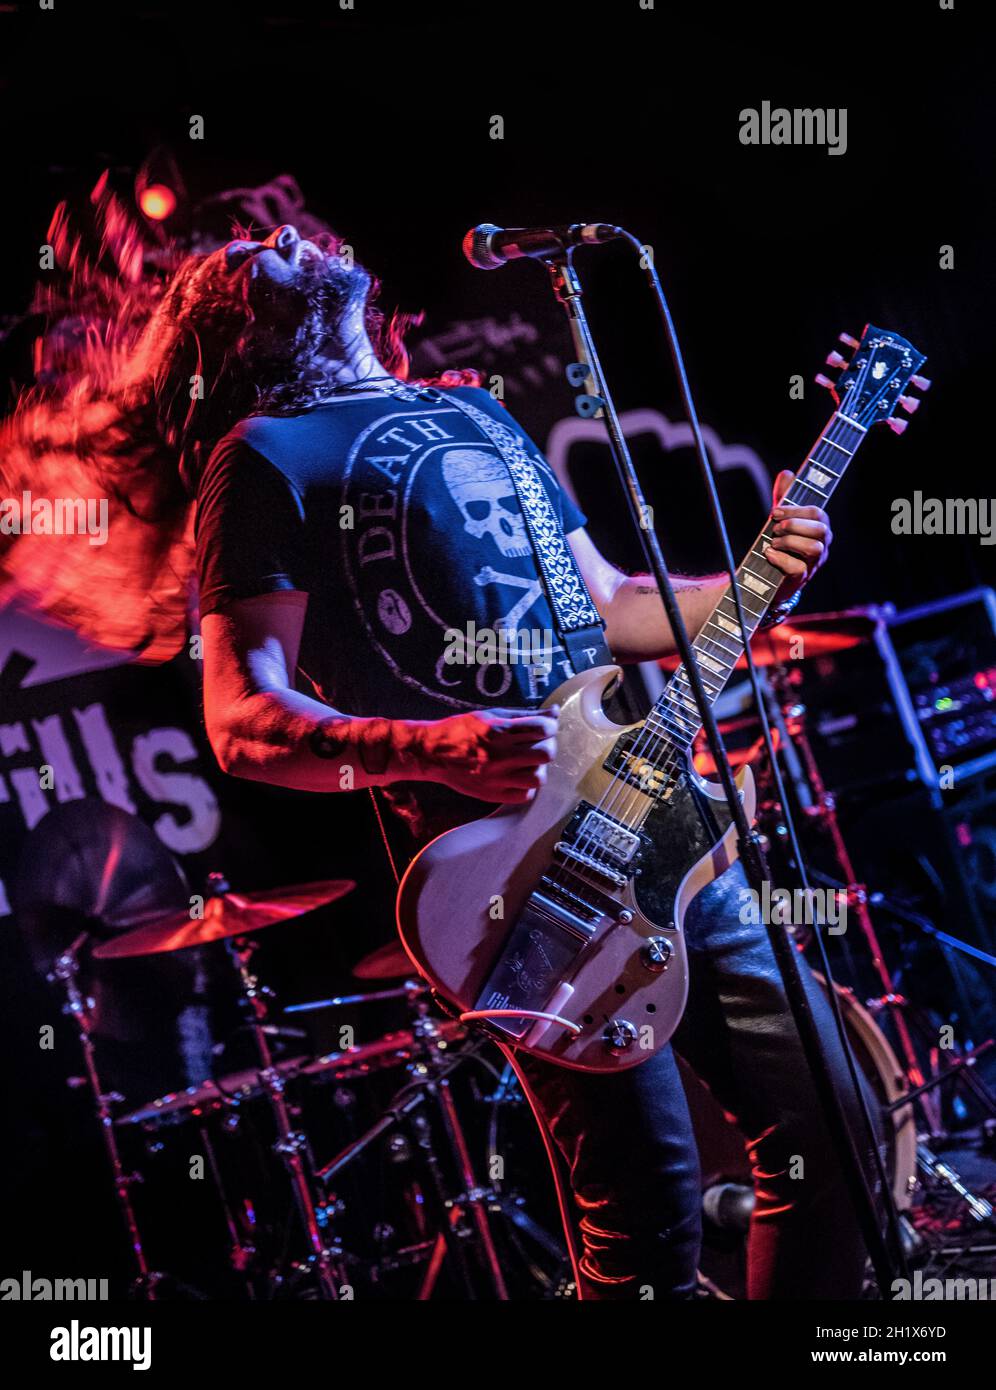 Phil X & The Drills live in concert at Birmingham O2 Academy 3, March 12th, 2020. Live music photography. Stock Photo